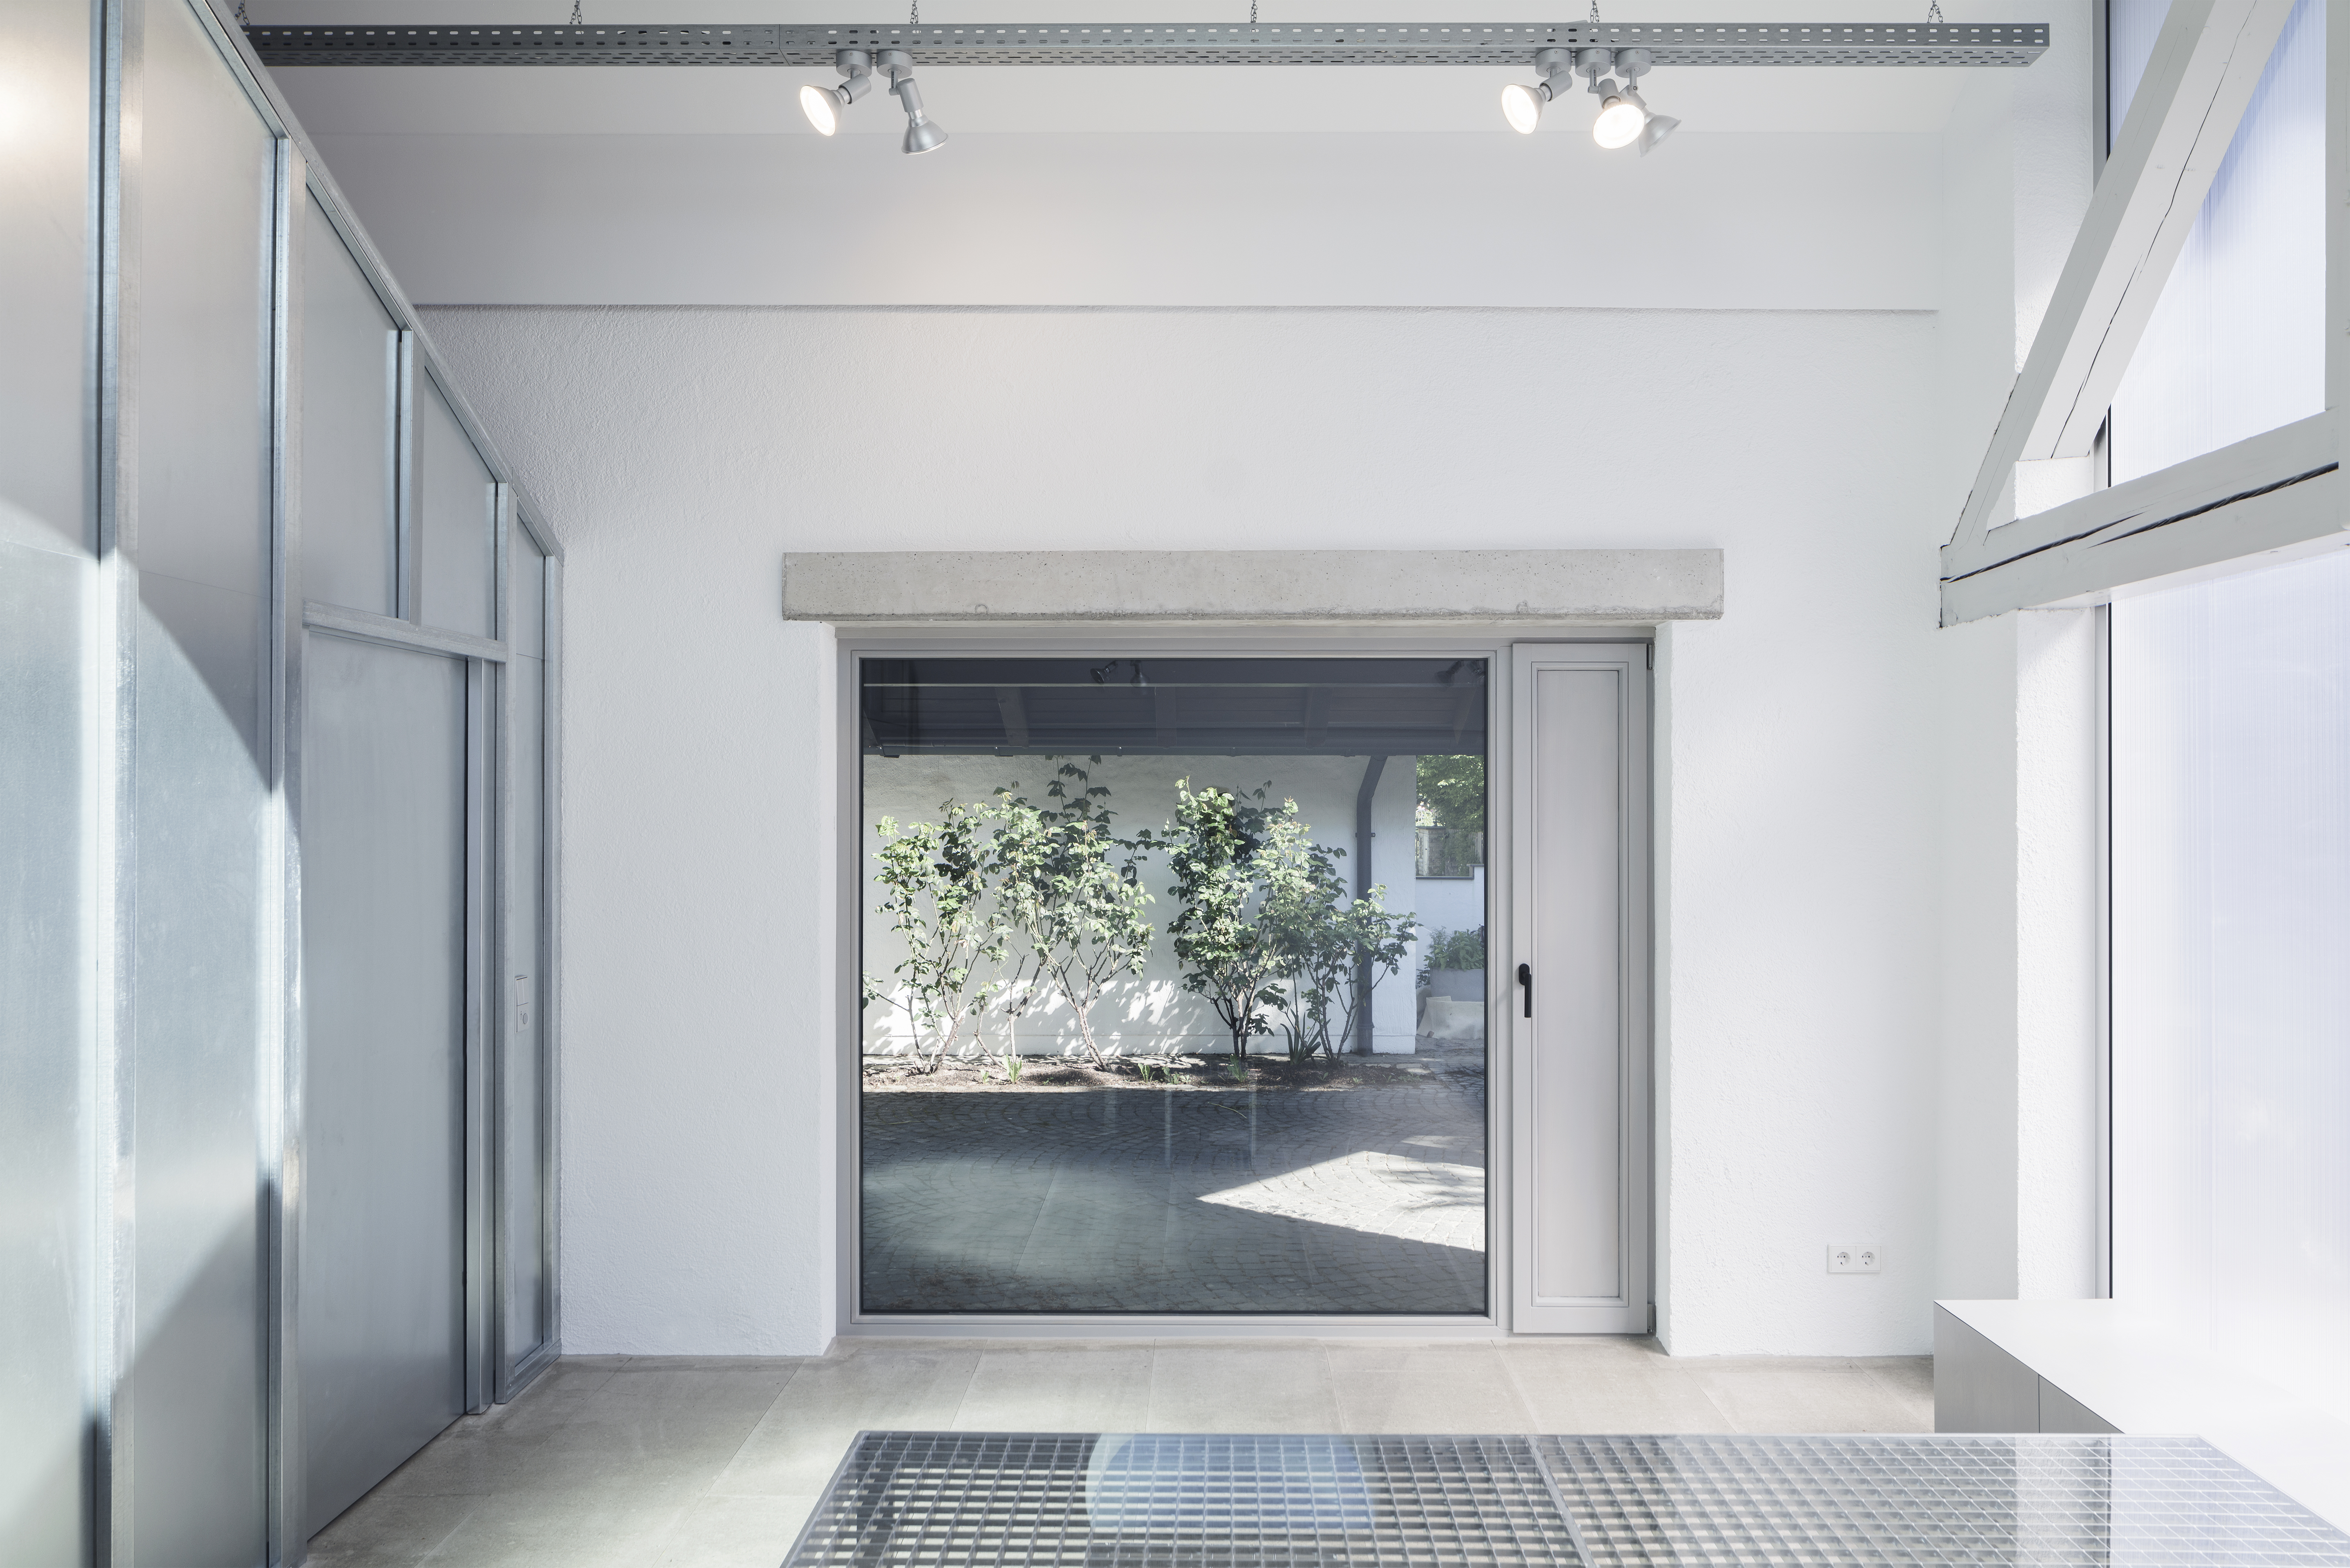 An opening that connects the space with the yard outside the garage